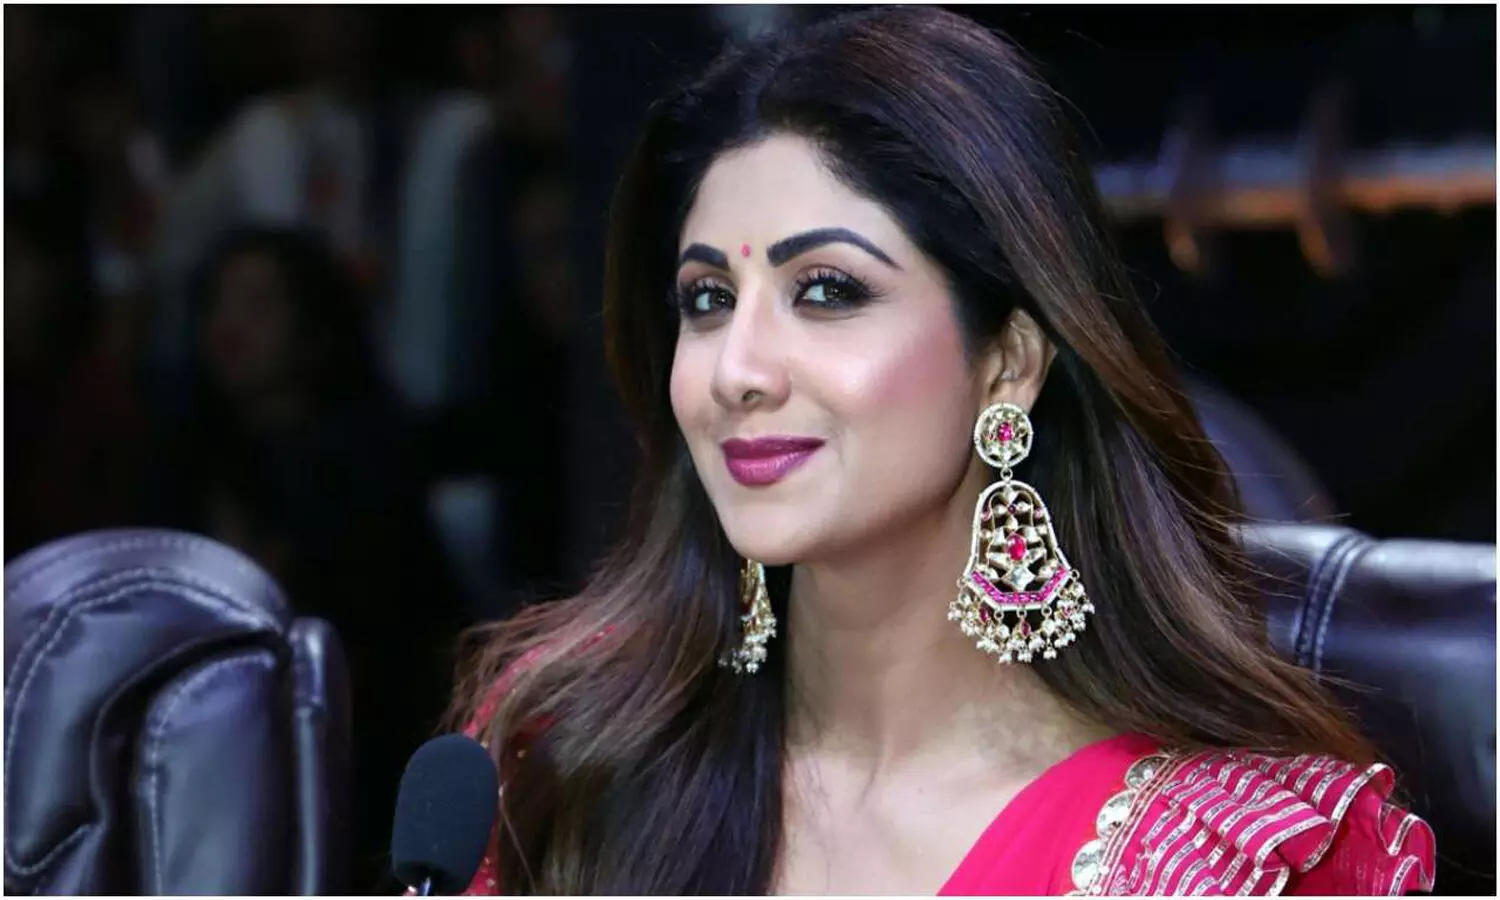 Hungama 2: Shilpa Shetty is coming back on Big Screen, Release date out!